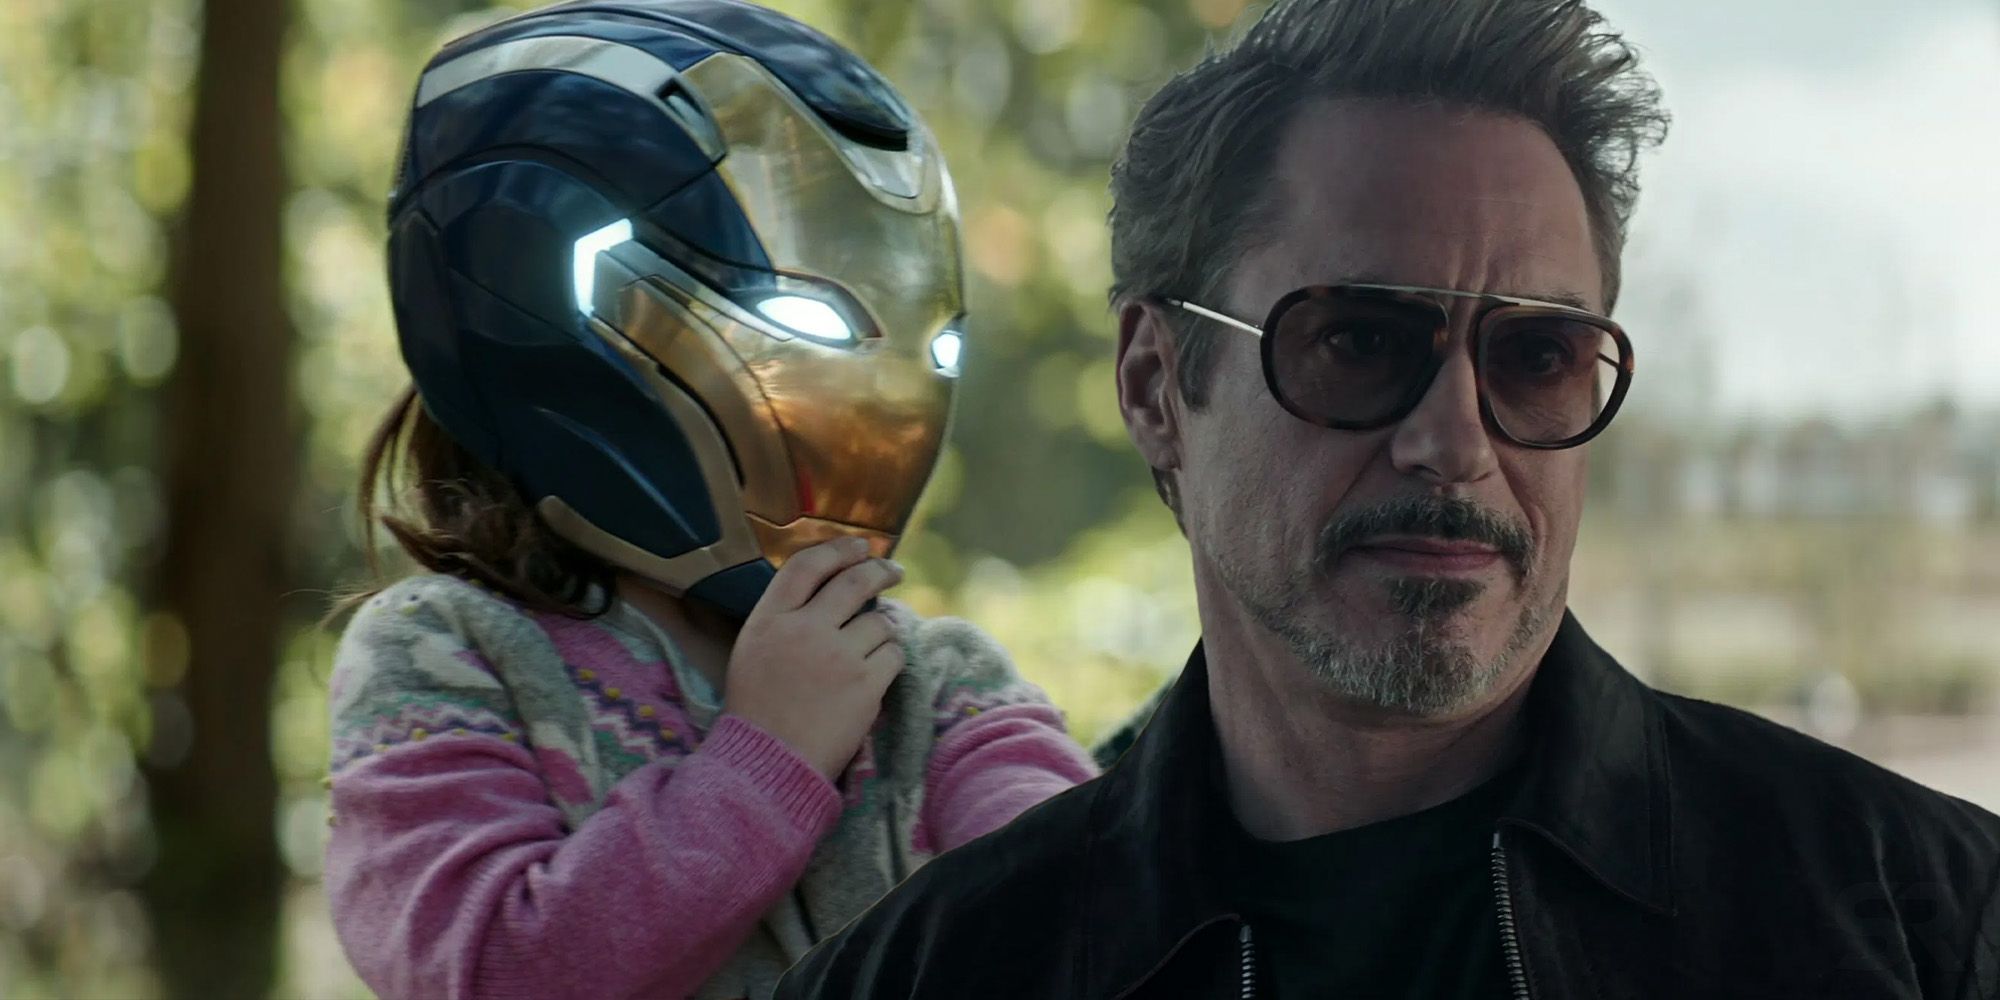 Avengers Endgame 5 Ways Iron Man S Ending Is Fitting And 5 Why It Makes